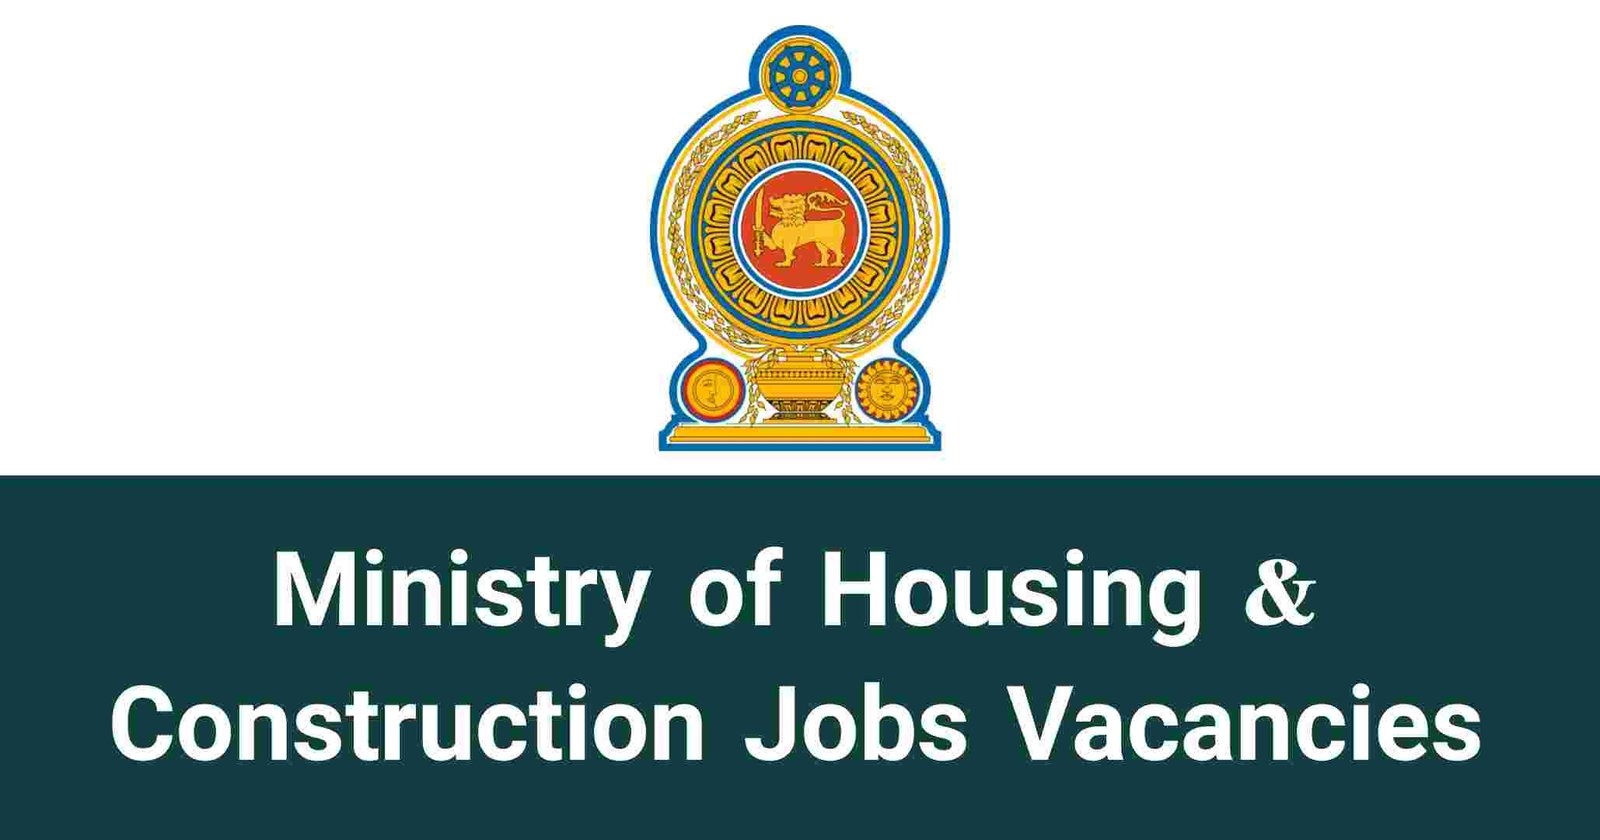 Ministry of Housing and Construction Jobs Vacancies